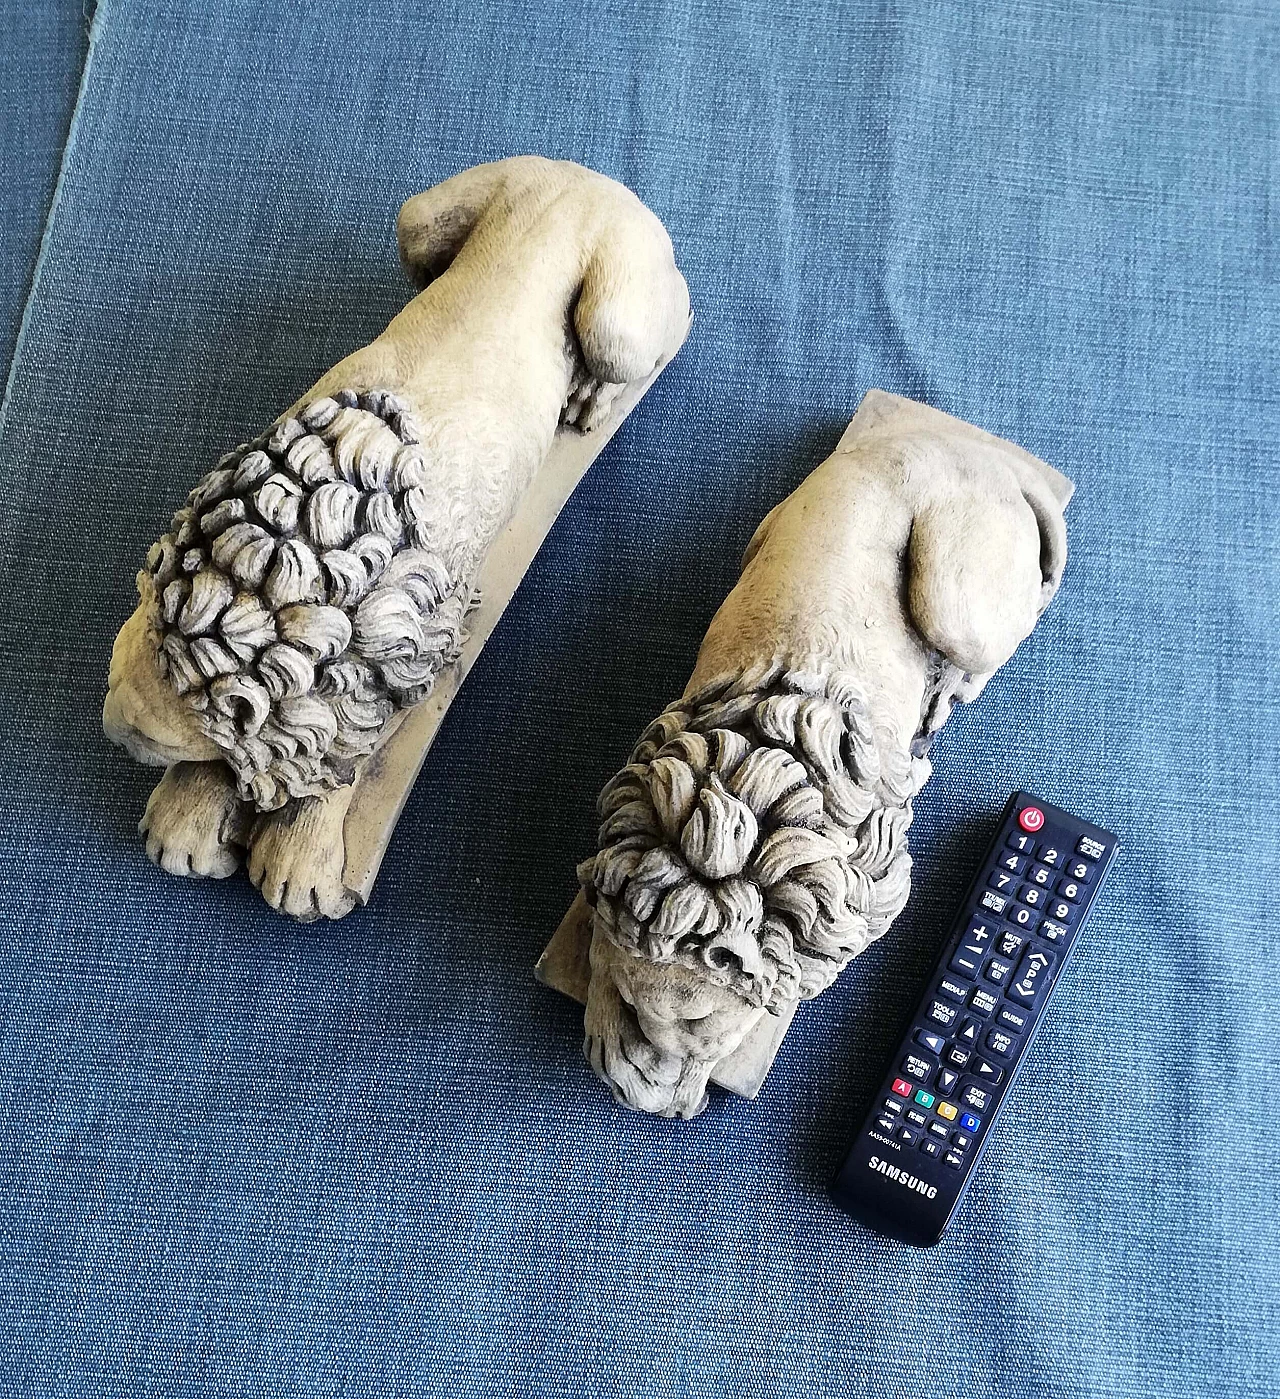 Pair of stone sculptures of sleeping lions 22